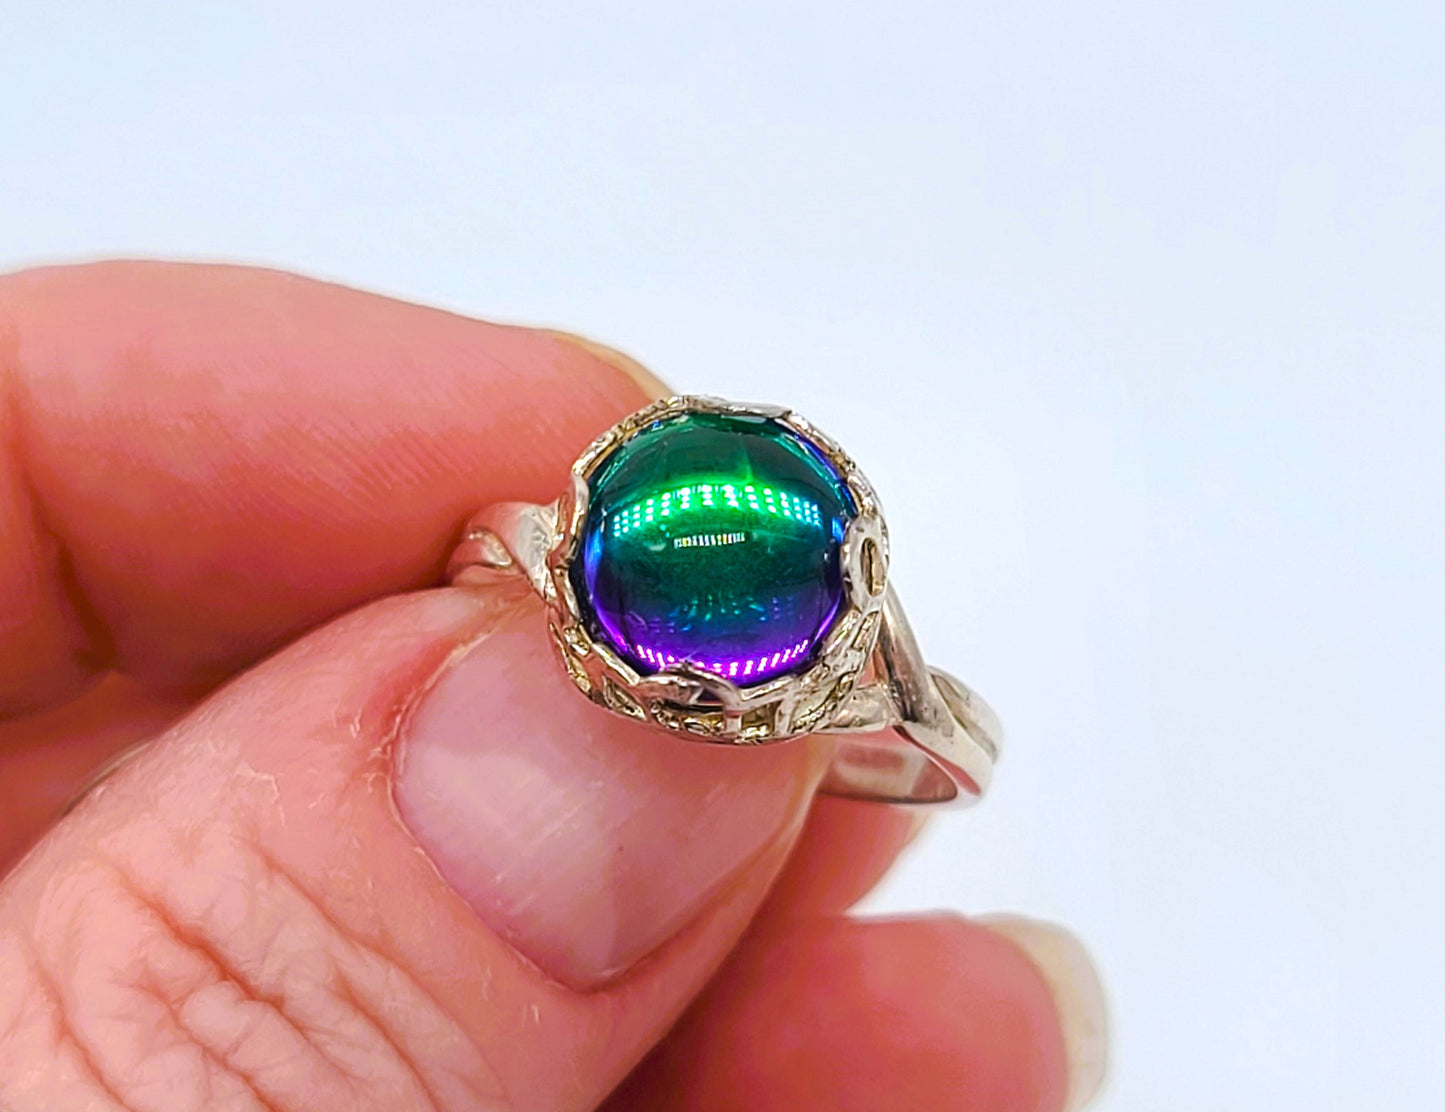 925 Sterling Silver Ring, Reflective Iridescent Rainbow Mirrorball Ring